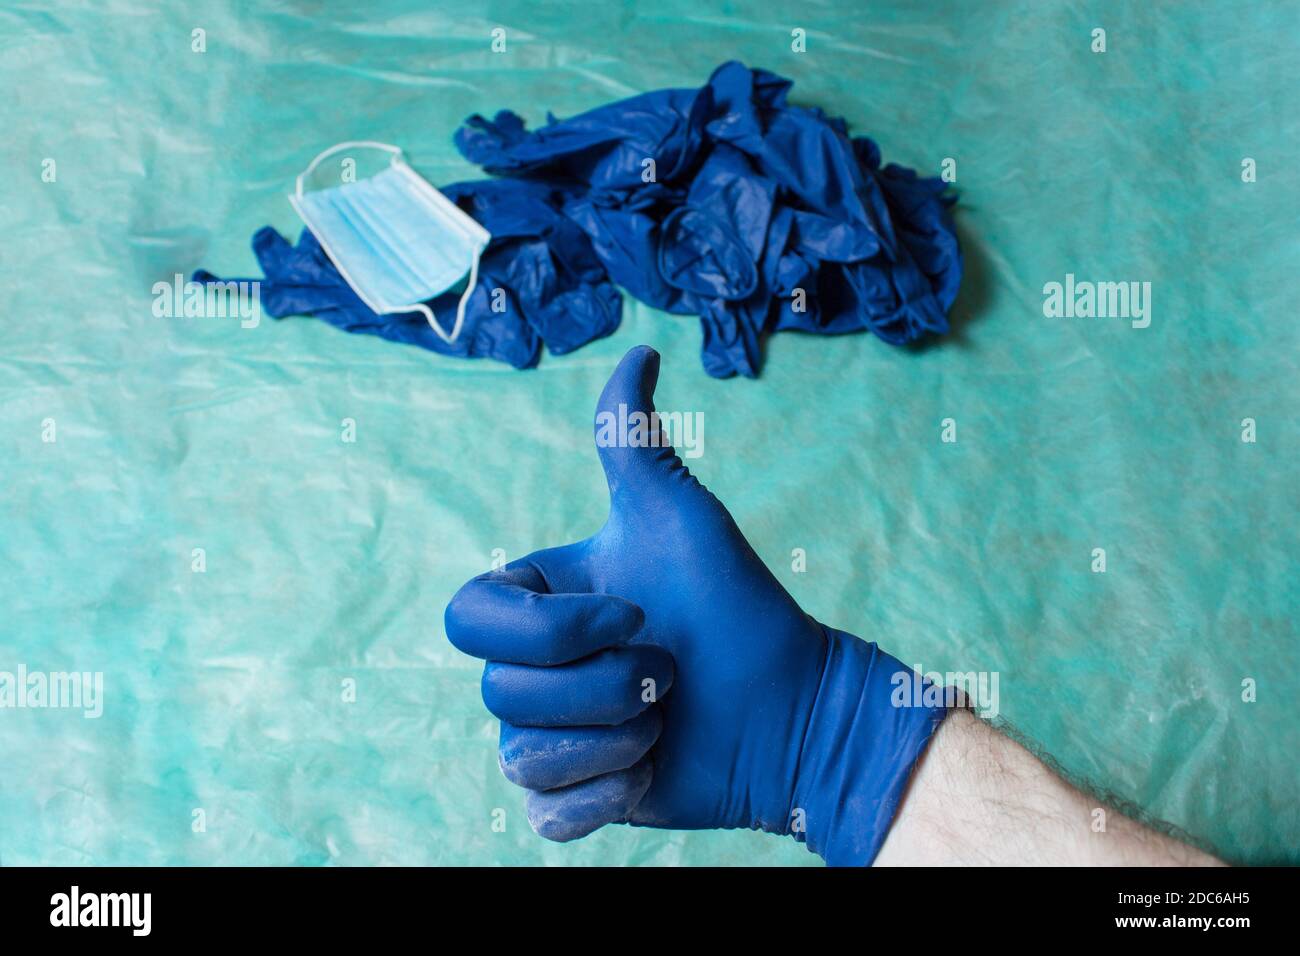 A hand with thumb up as an approval gesture with an unfocused pile of personal care equipment worn out in healthcare placed on green table. Stock Photo